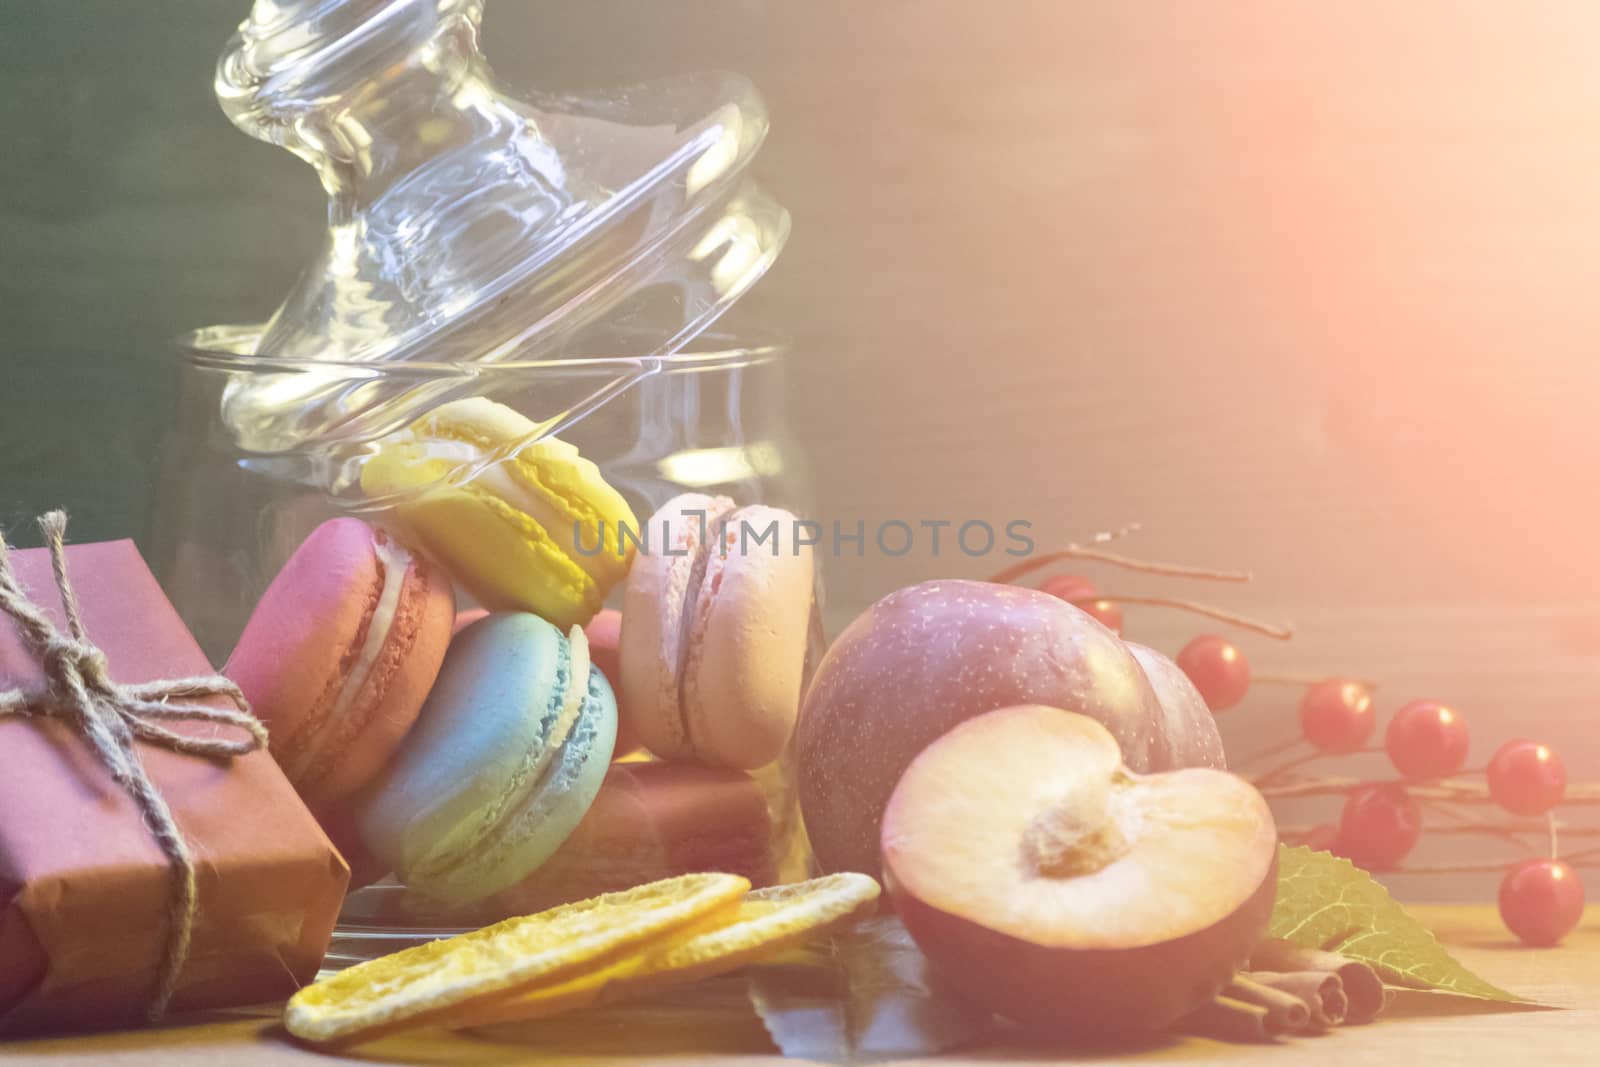 Fruits, sweets, gift. Festive cozy mood. Soft focus. Background.